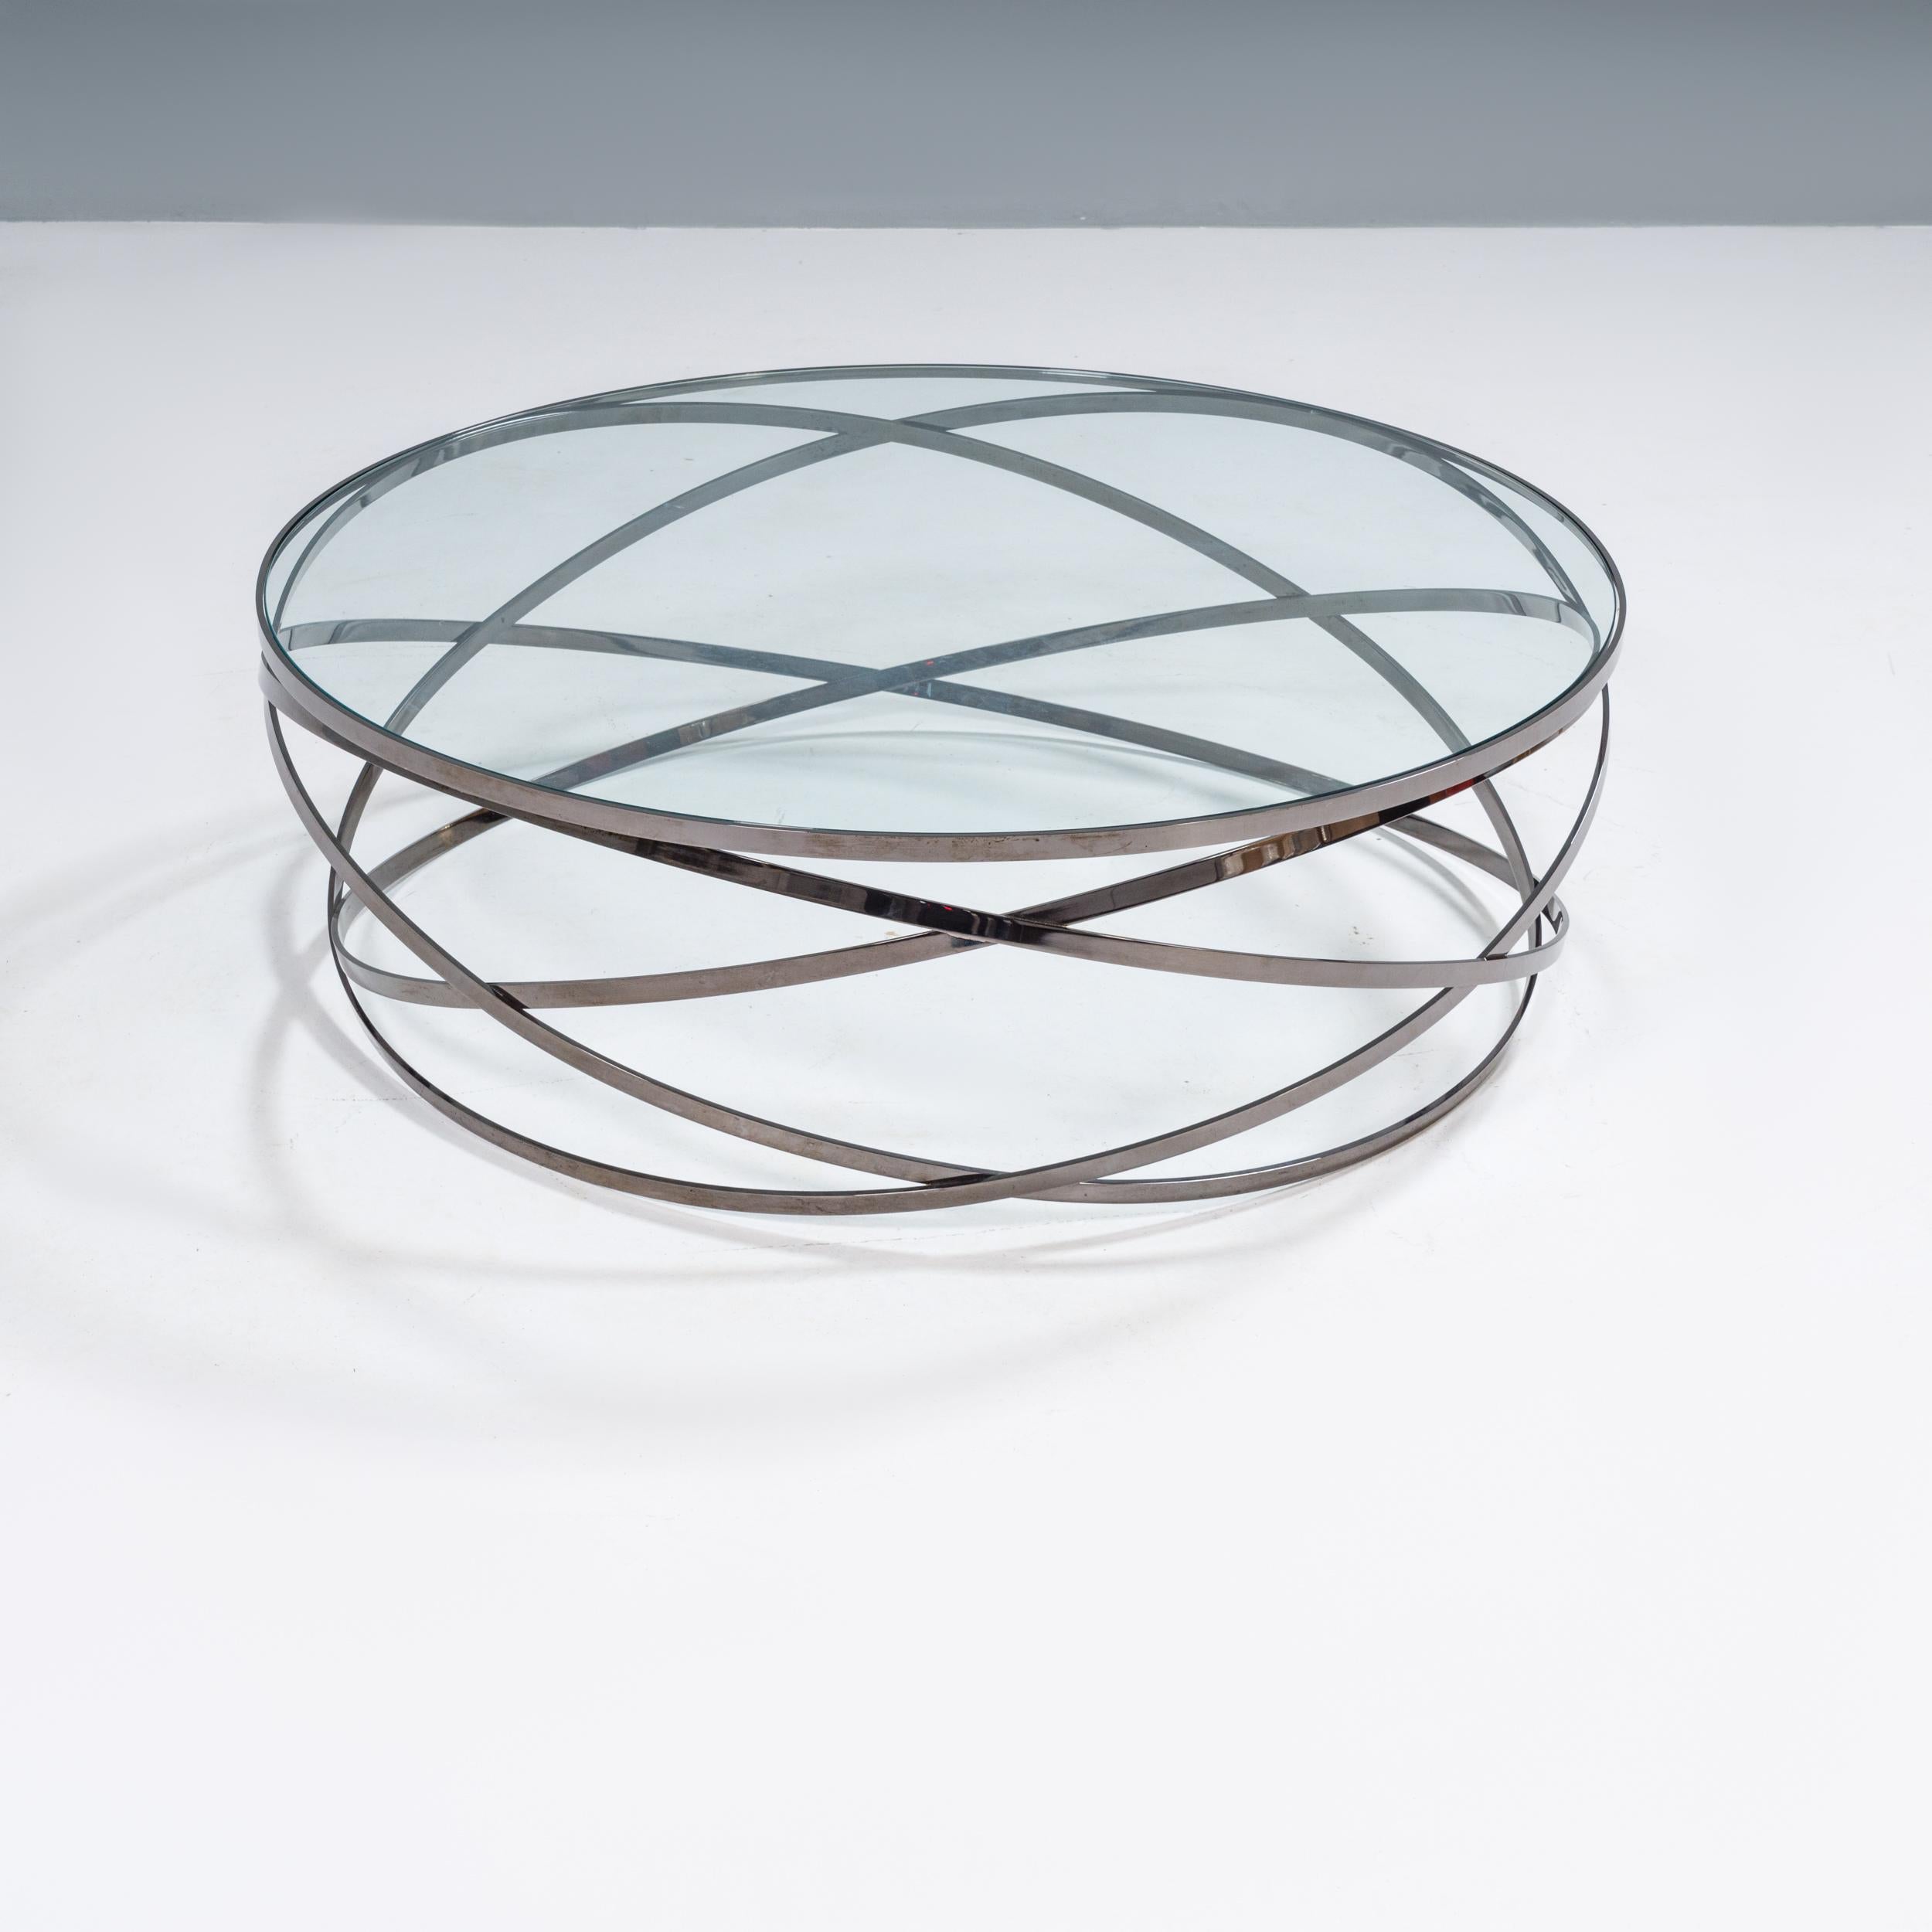 Designed by Cédric Ragot for Roche Bobois, the Evol cocktail table was inspired by a series of photographs of a hoop falling to the ground.

The movement is captured through the use of three intersecting steel circles in a black nickel finish,